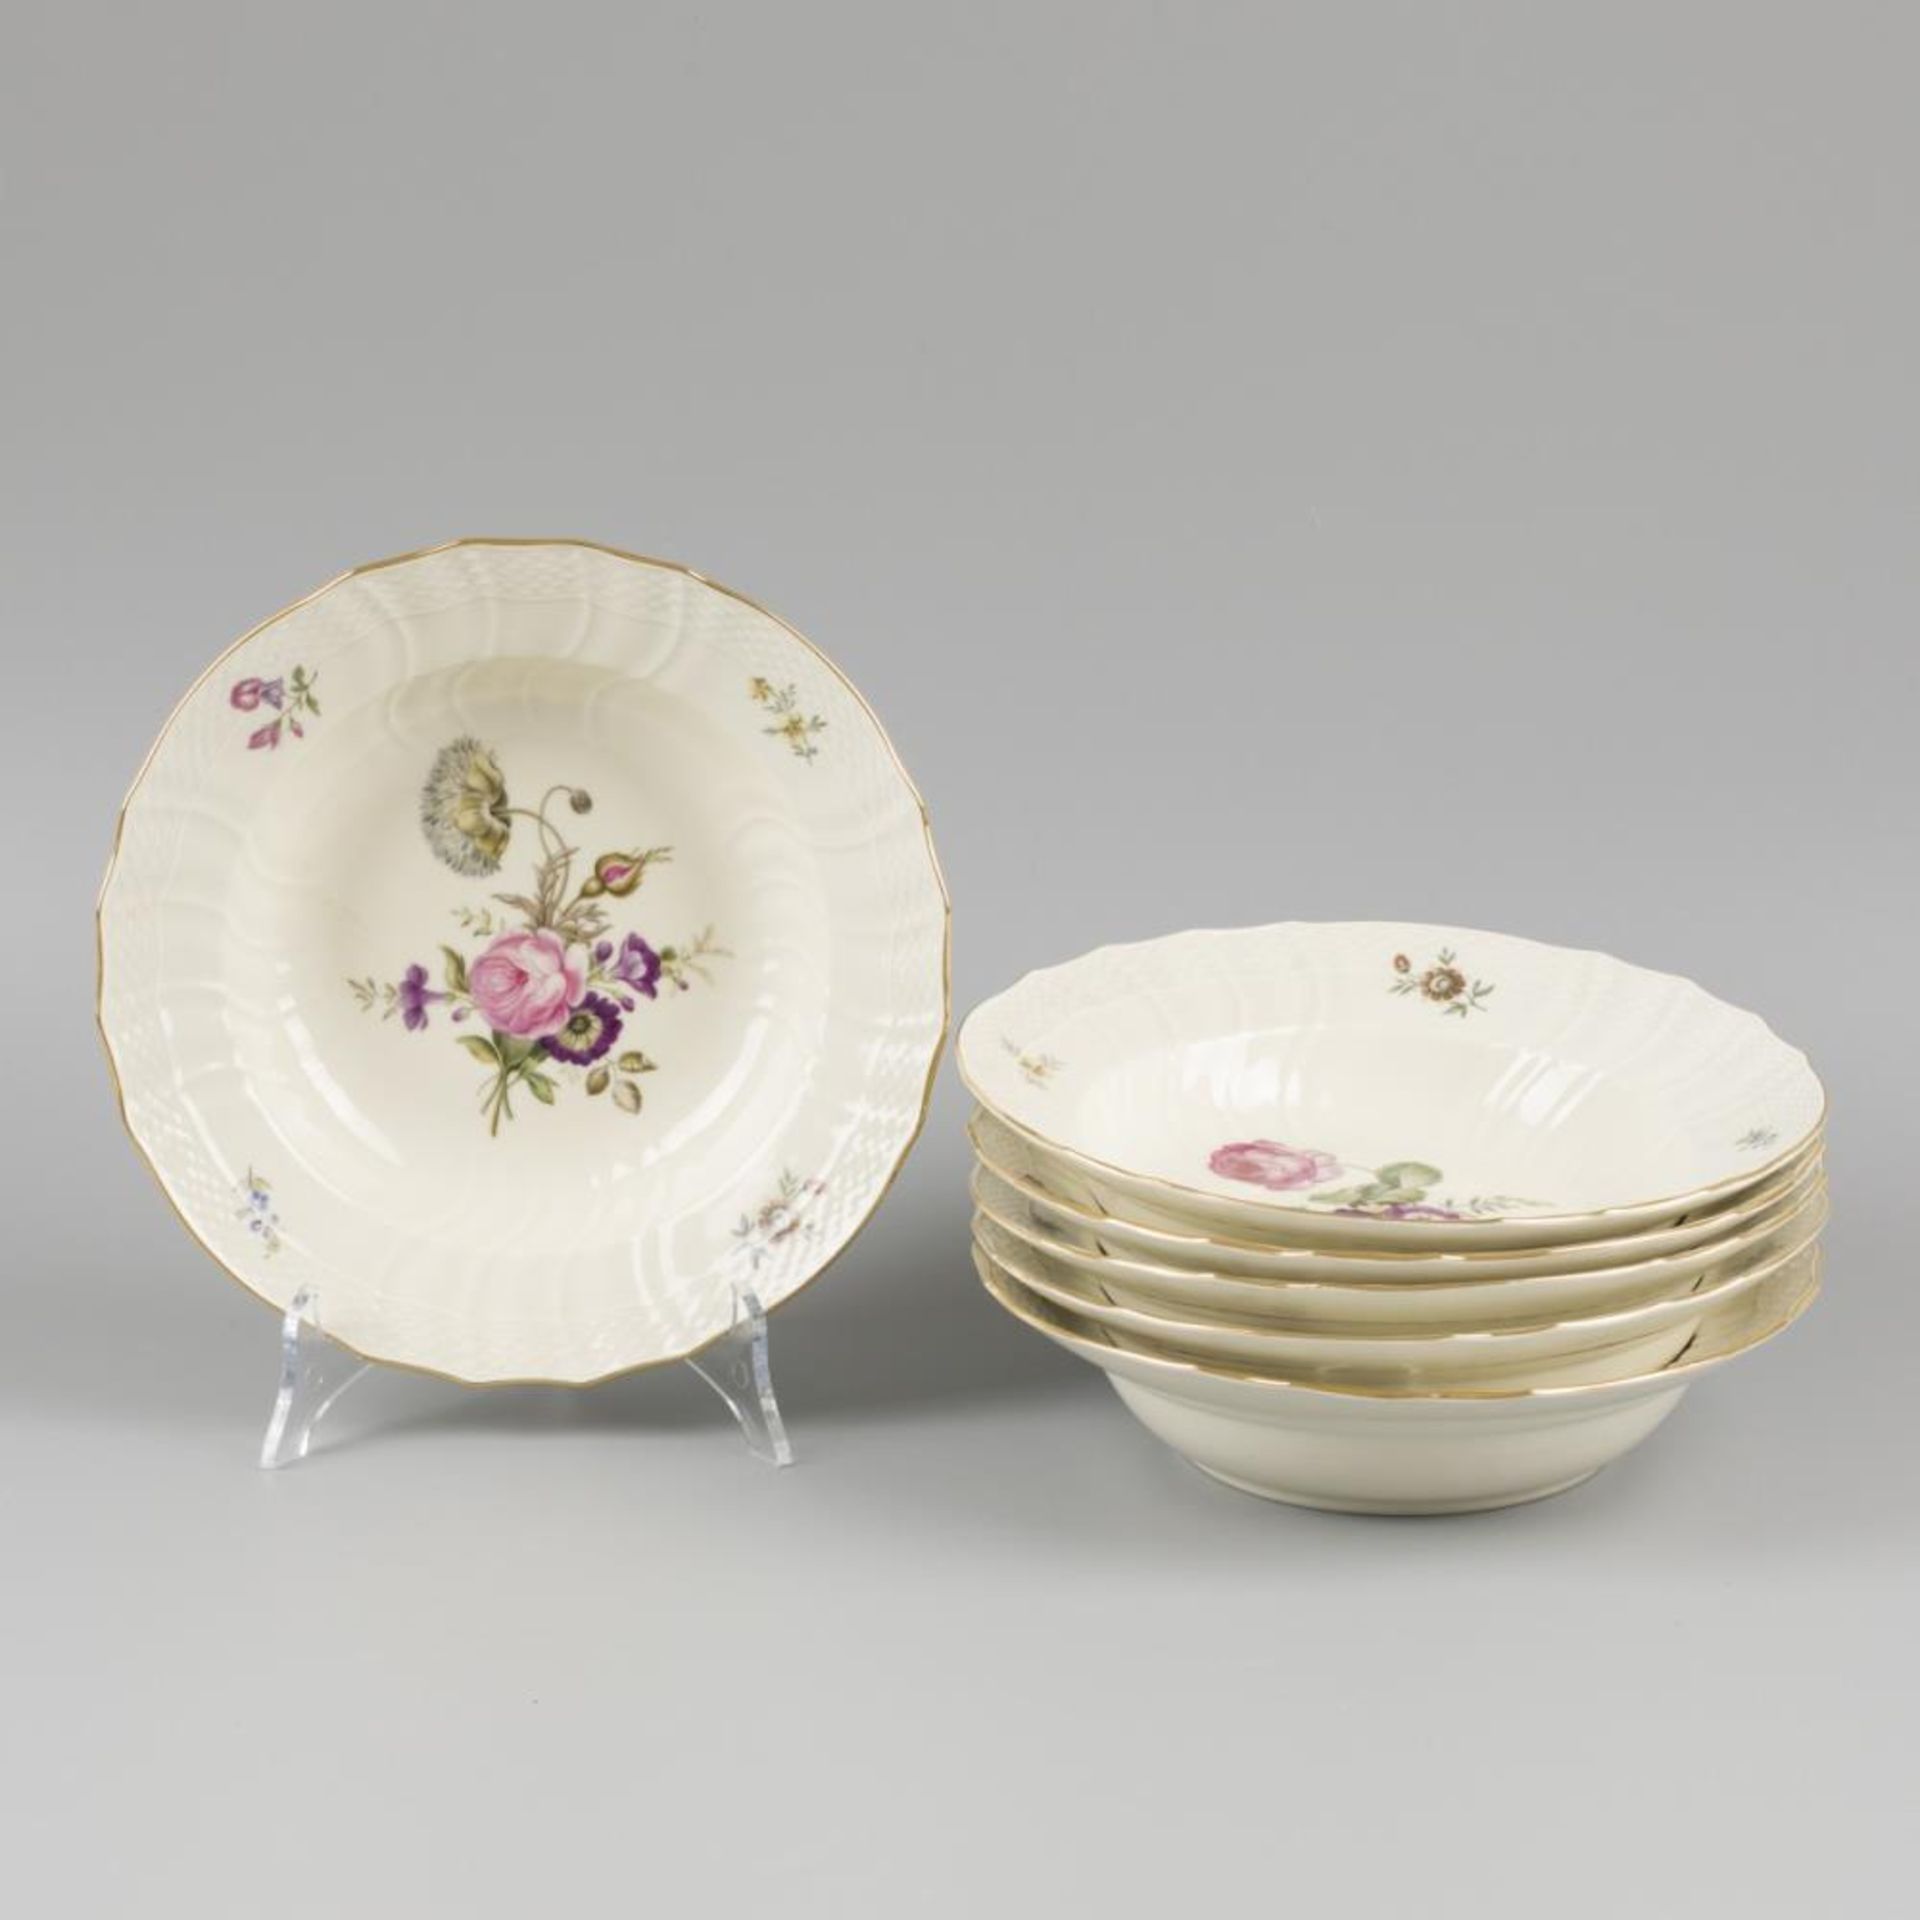 A set of (6) porcelain soup plates decorated with flowers, marked Royal Copenhagen. Denmark, 20th ce